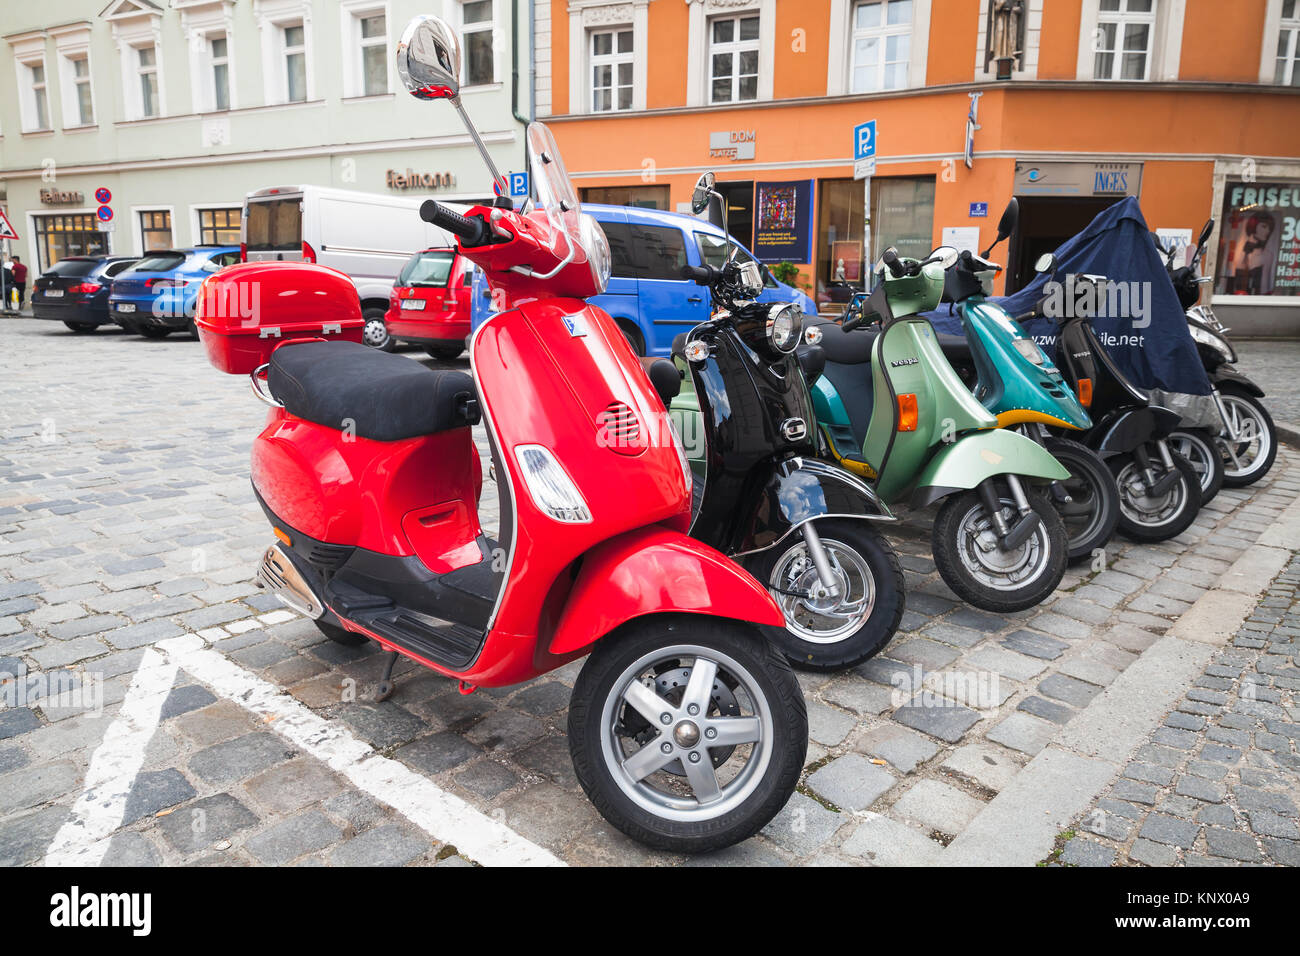 Regensburg, Germany - May 5, 2017: Colorful Vespa scooters stand in a row on a parking lot in old European town Stock Photo